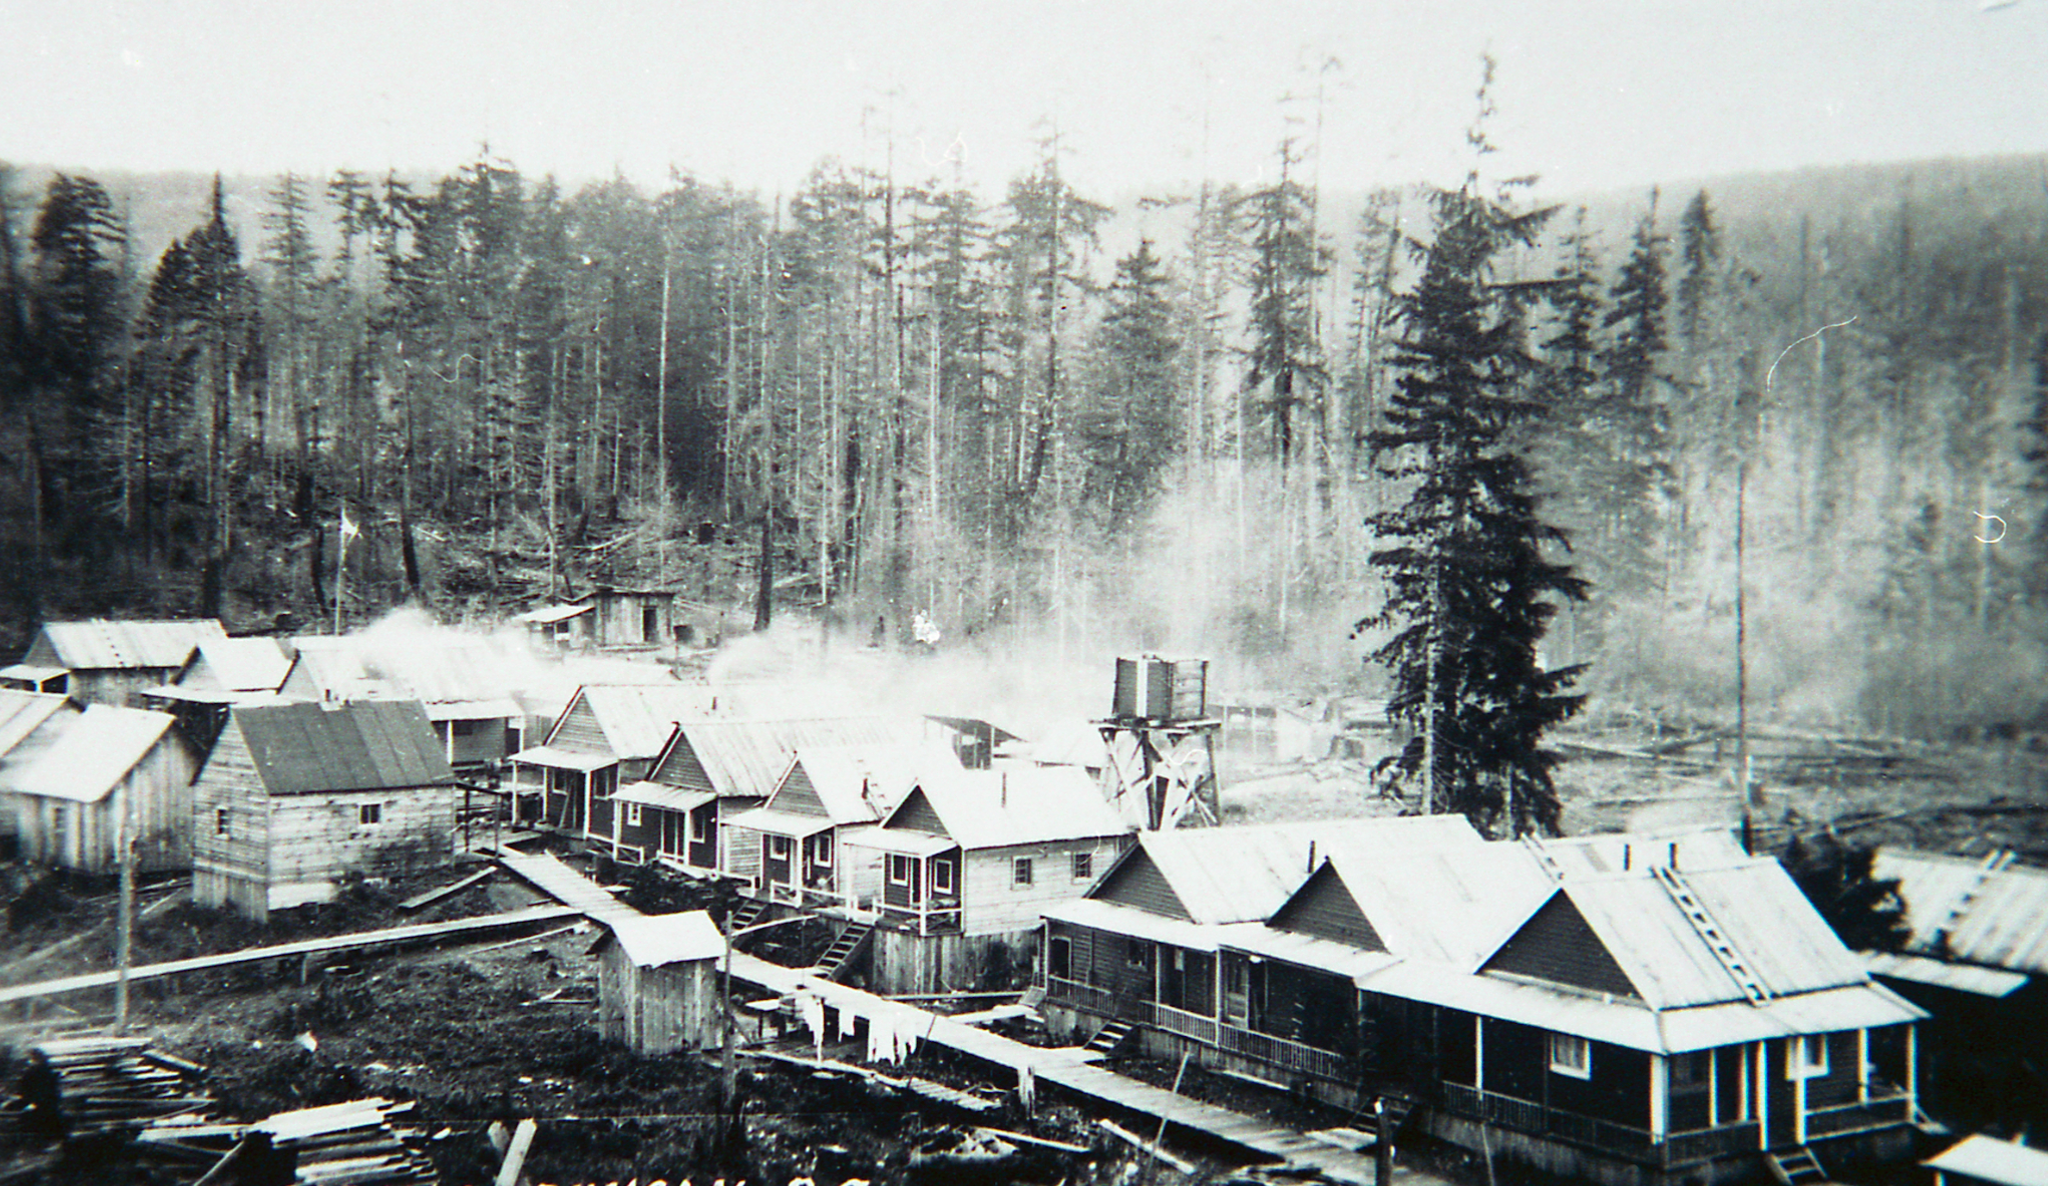 A black-and-white photograph displaying Paldi townsite with a vast forest of skinny trees in the background. The foreground shows evidence of lumber work, including stacks of lumber.